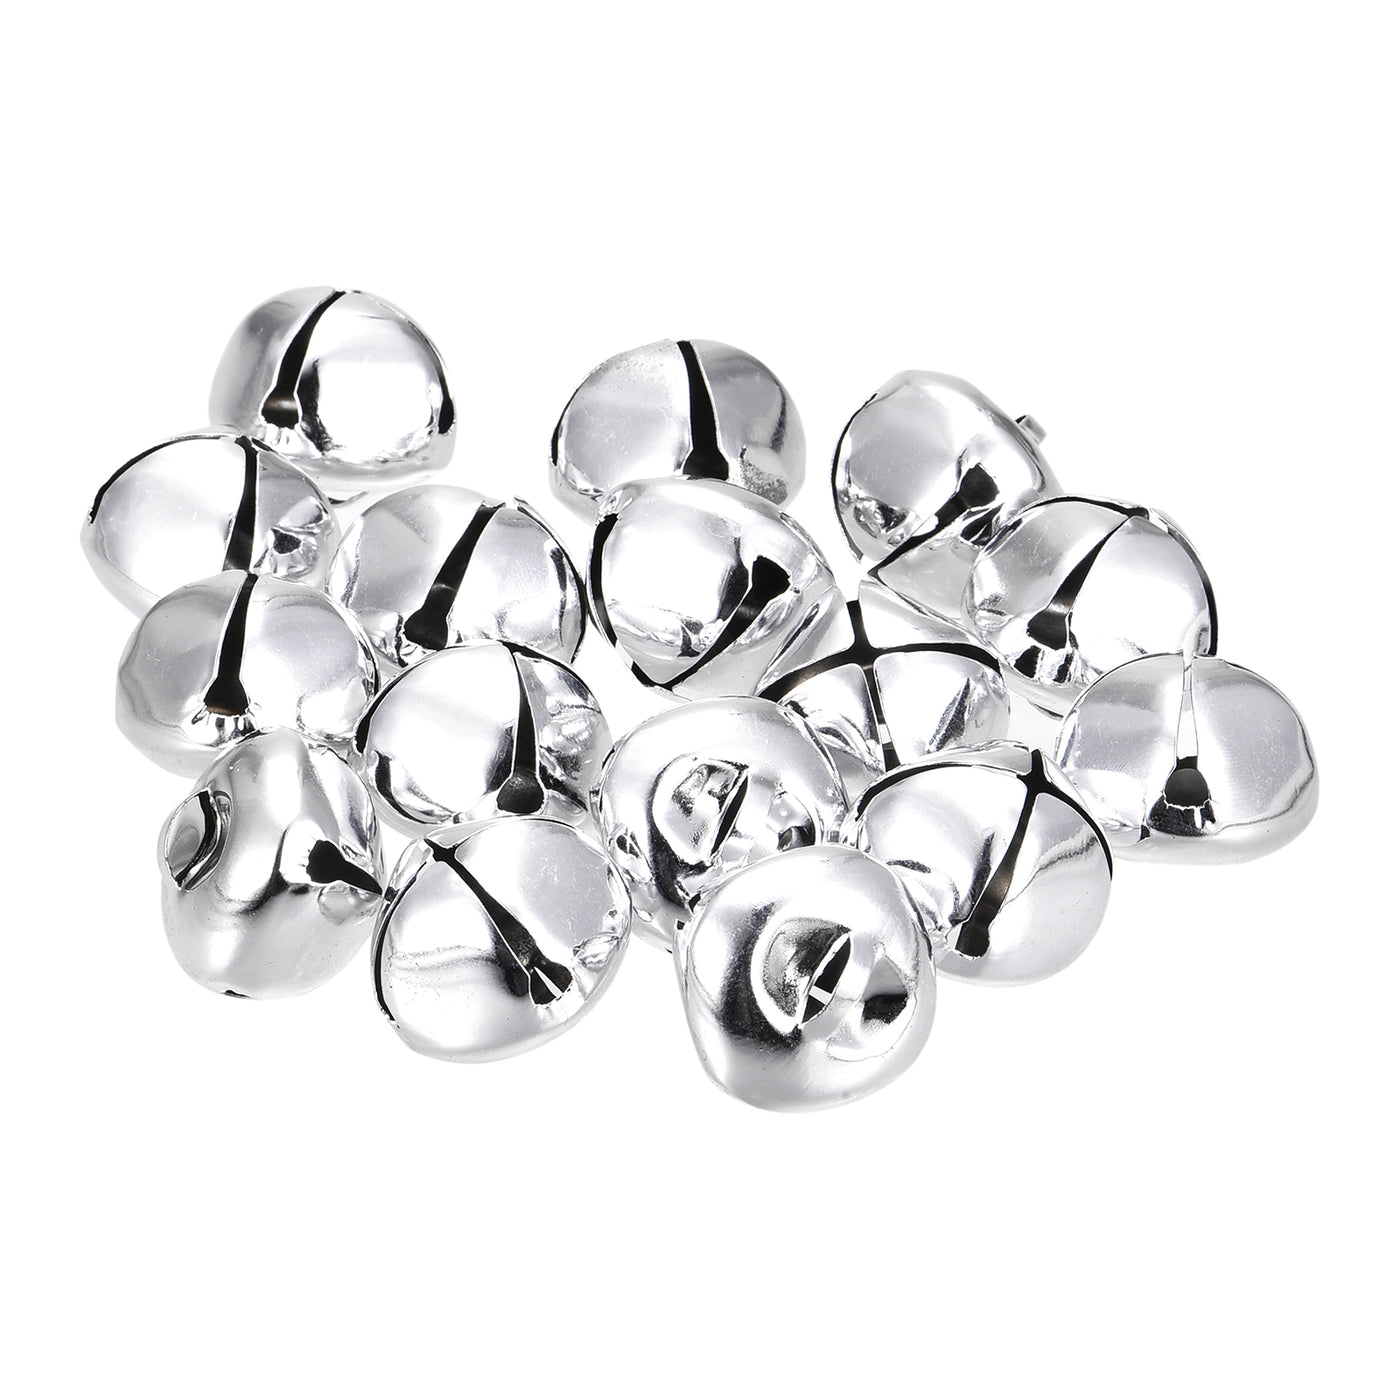 Uxcell Uxcell Jingle Bells, 24mm 48pcs Carbon Steel Craft Bells for DIY Christmas, Blue